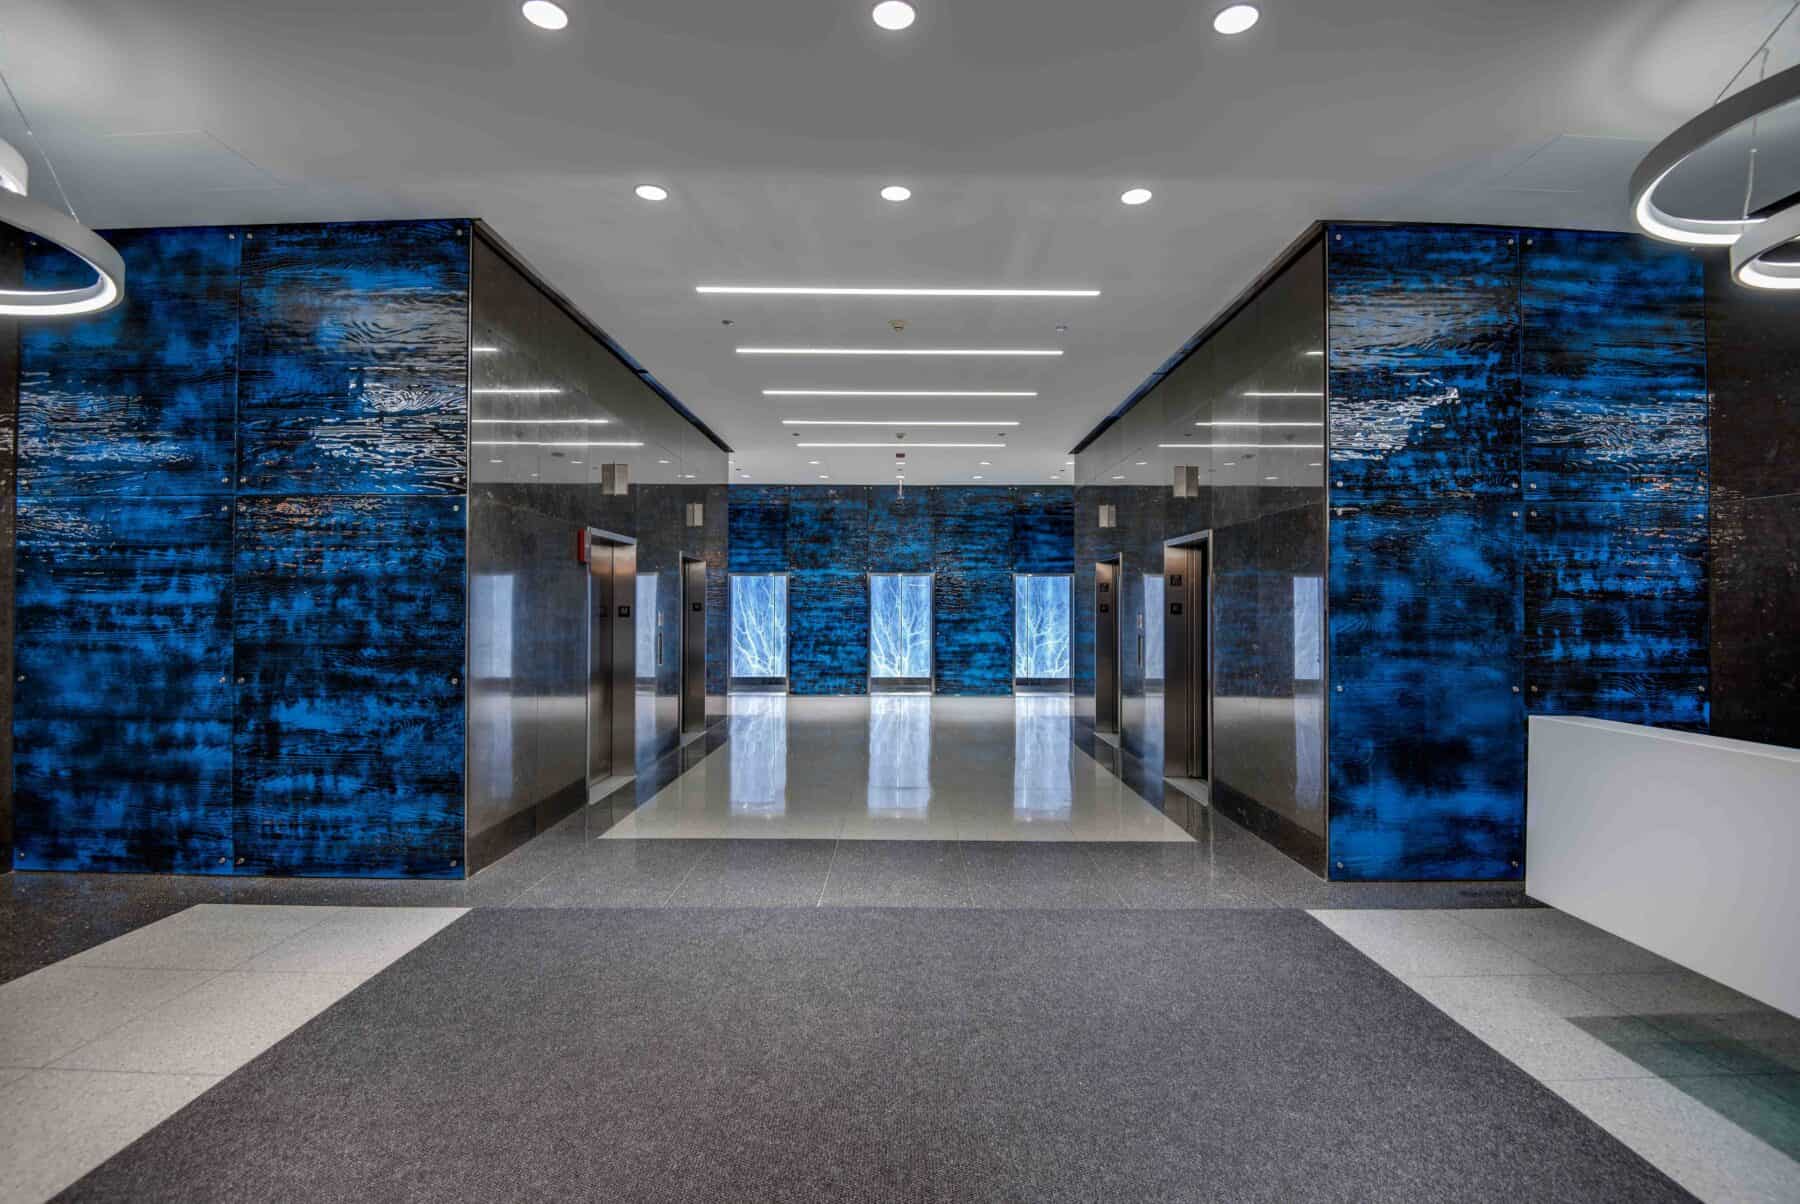 Michigan Avenue Lobby Remodel with Blue Glass Wall Panels, Floating Reception Desk and Suspended LED Lights by Commercial Builder & General Contractor Structural Enterprises